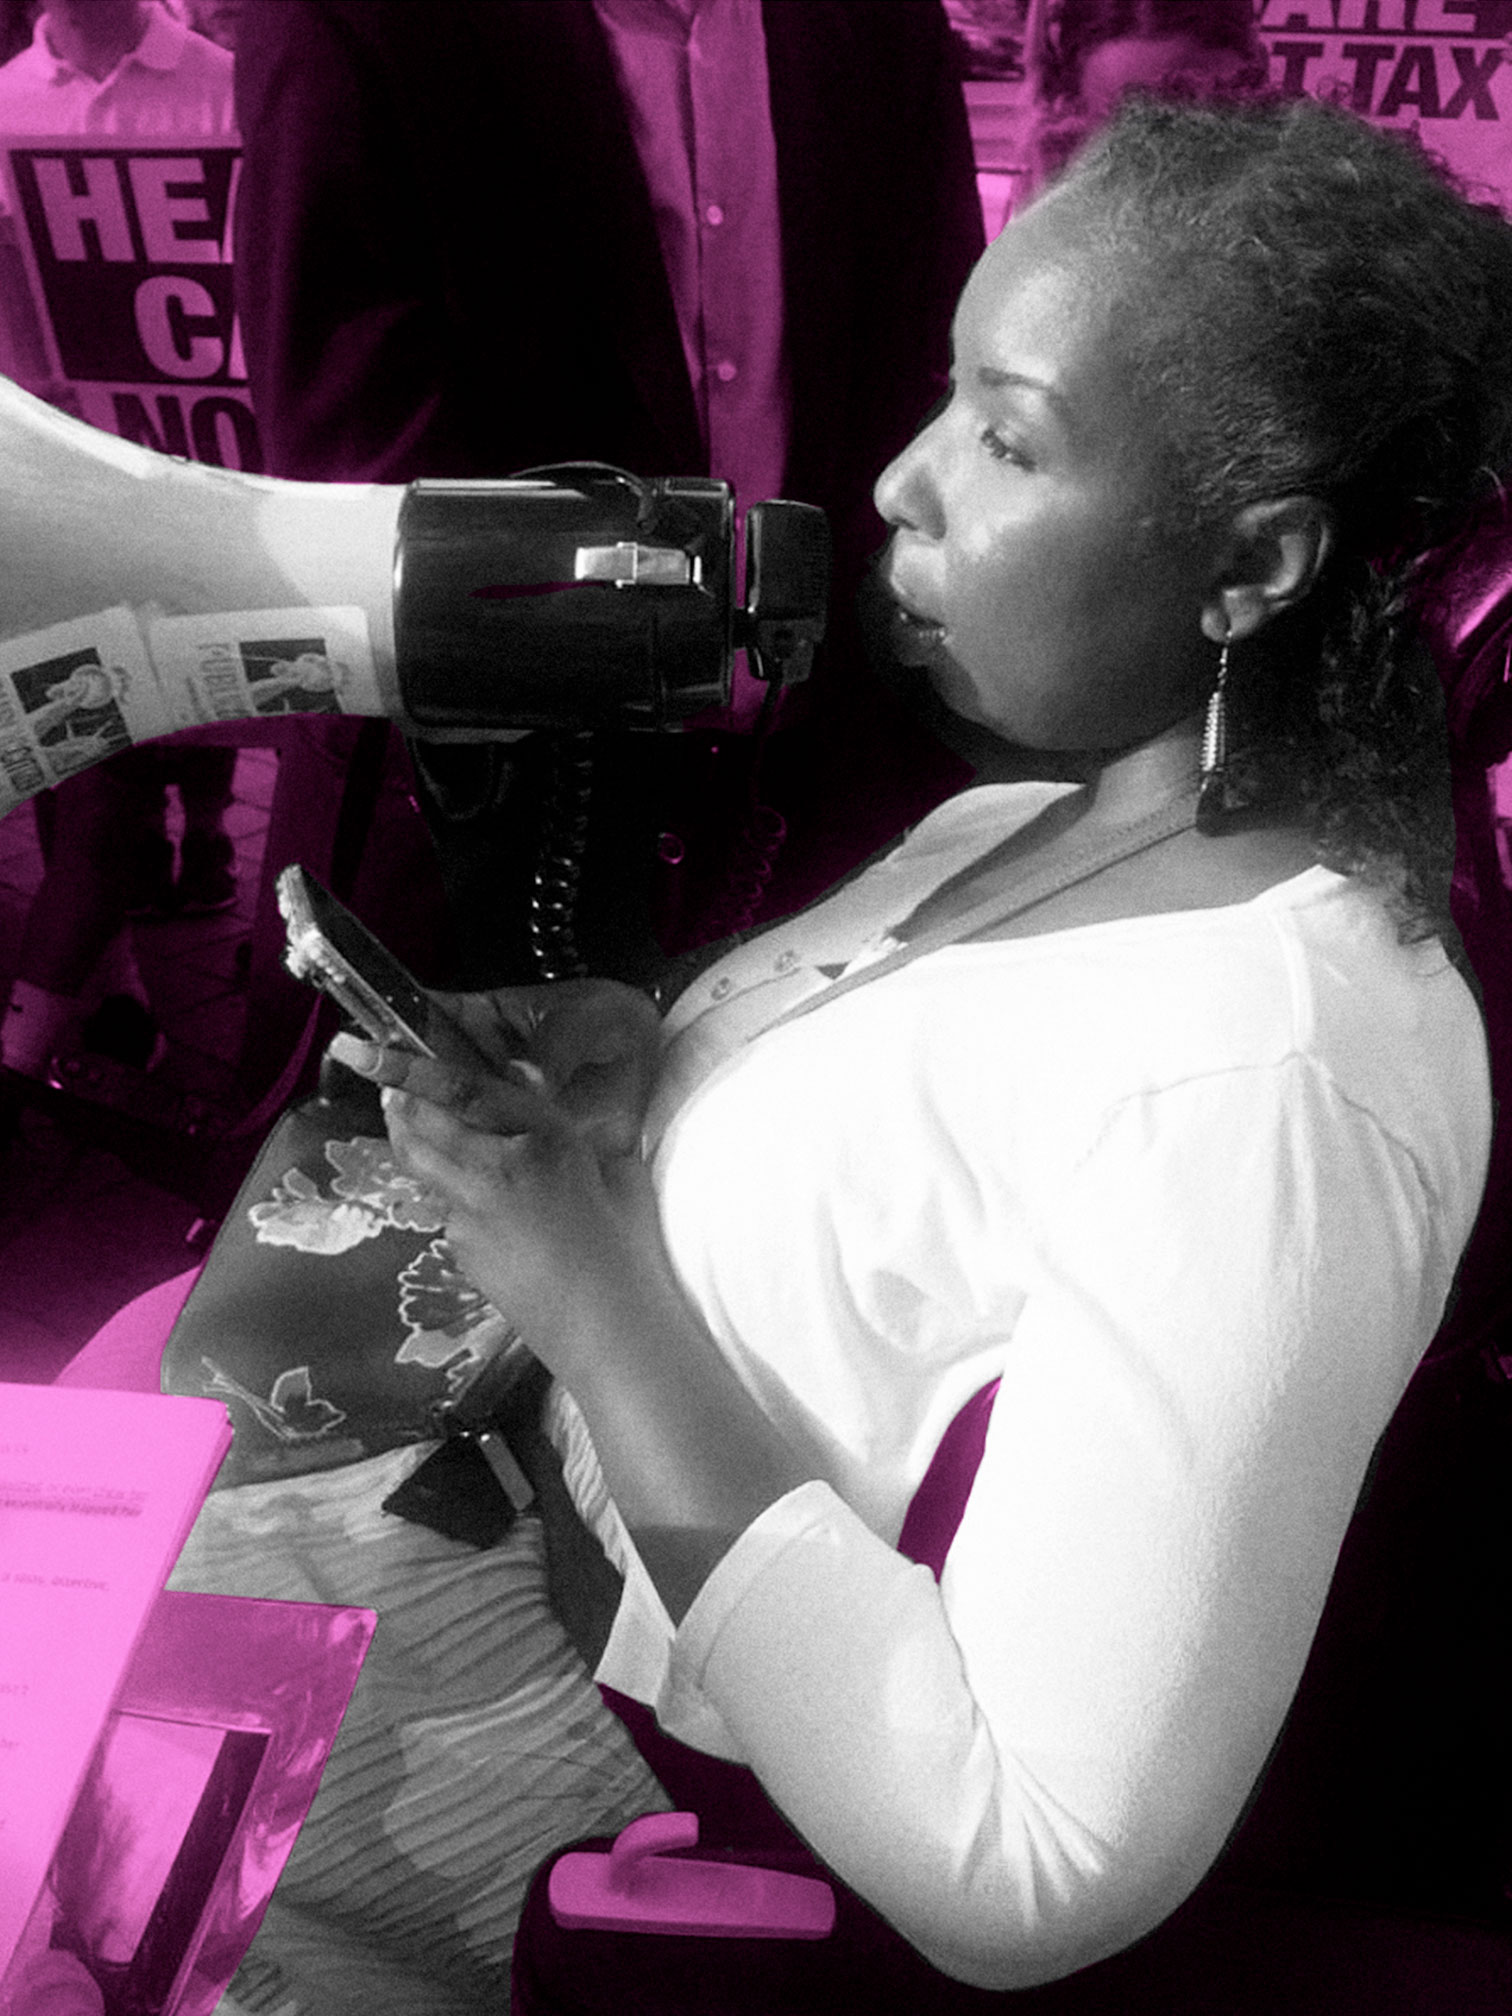 Andraéa LaVant uses a wheelchair and faces to the left, holding a phone and speaking to a crowd at a protest out of a microphone. The image is filtered in neon pink, while Andraéa is filtered in black and white.